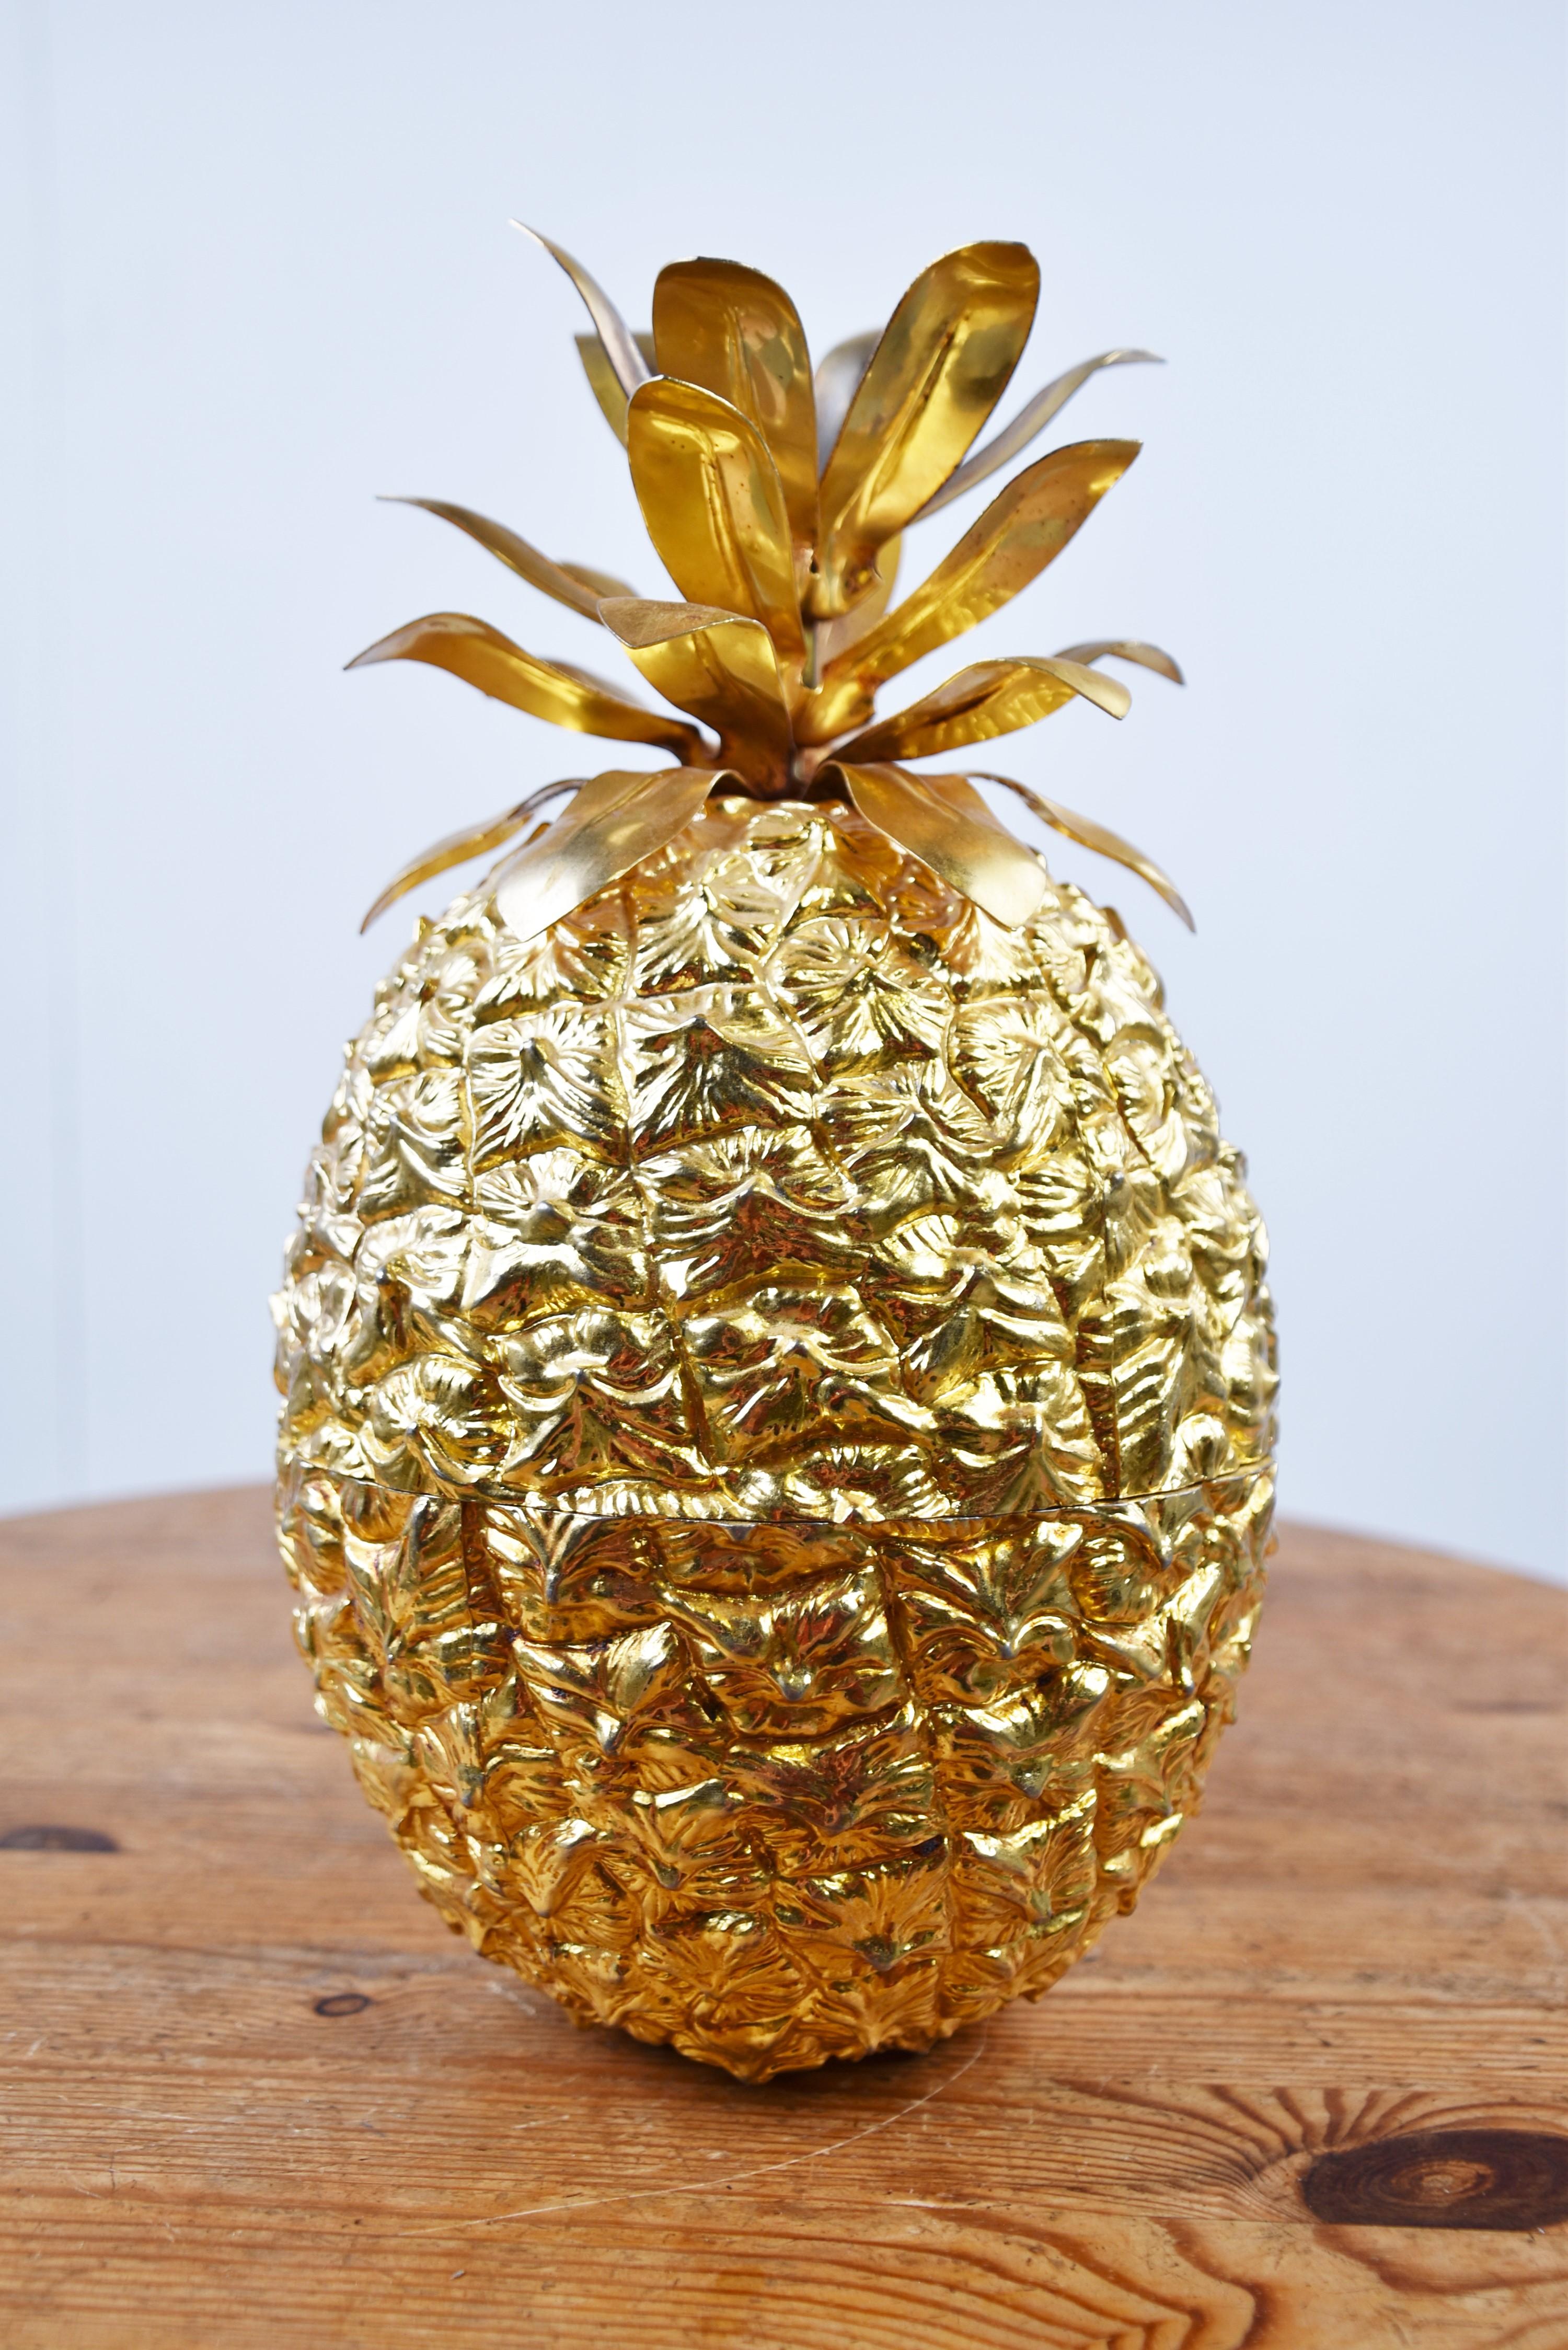 Swiss Vintage Pineapple Ice Bucket by Hans Turnwald for Freddo Therm, 1970s